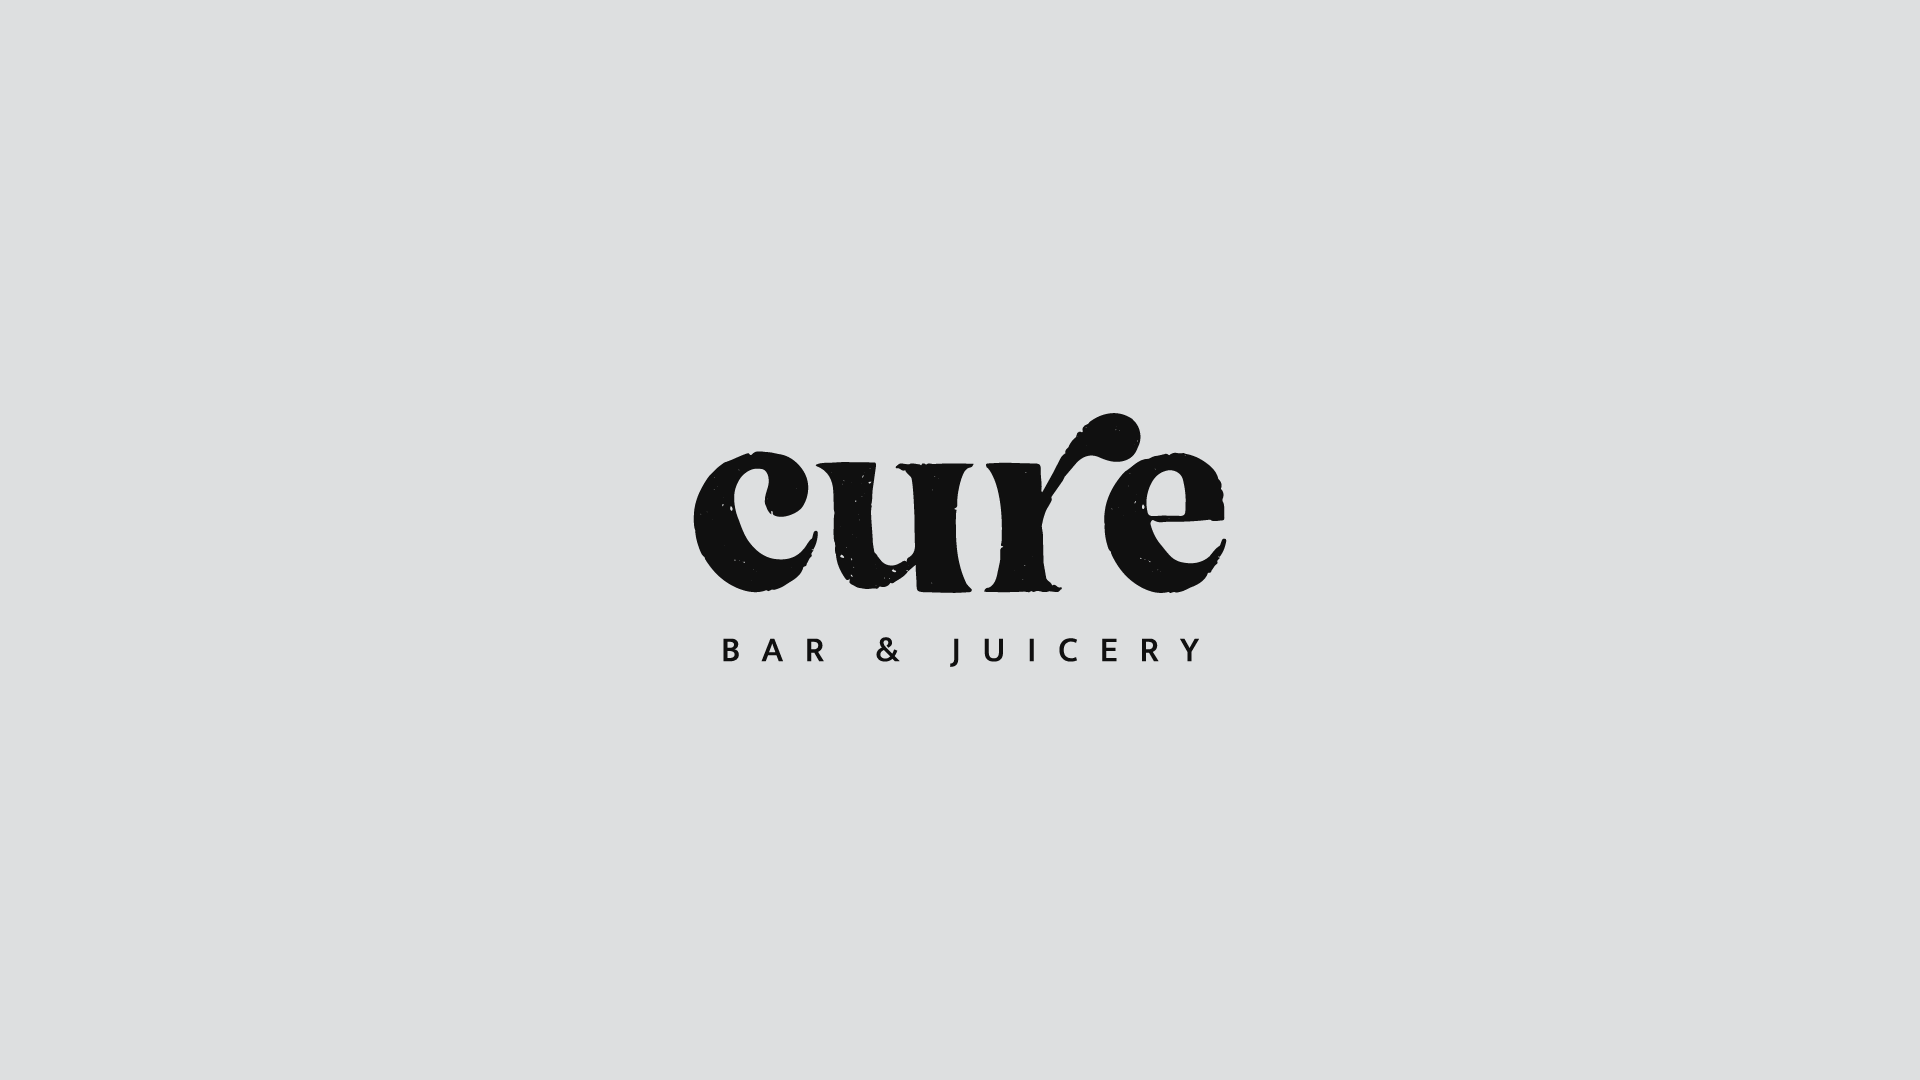 Cure bar and juicery